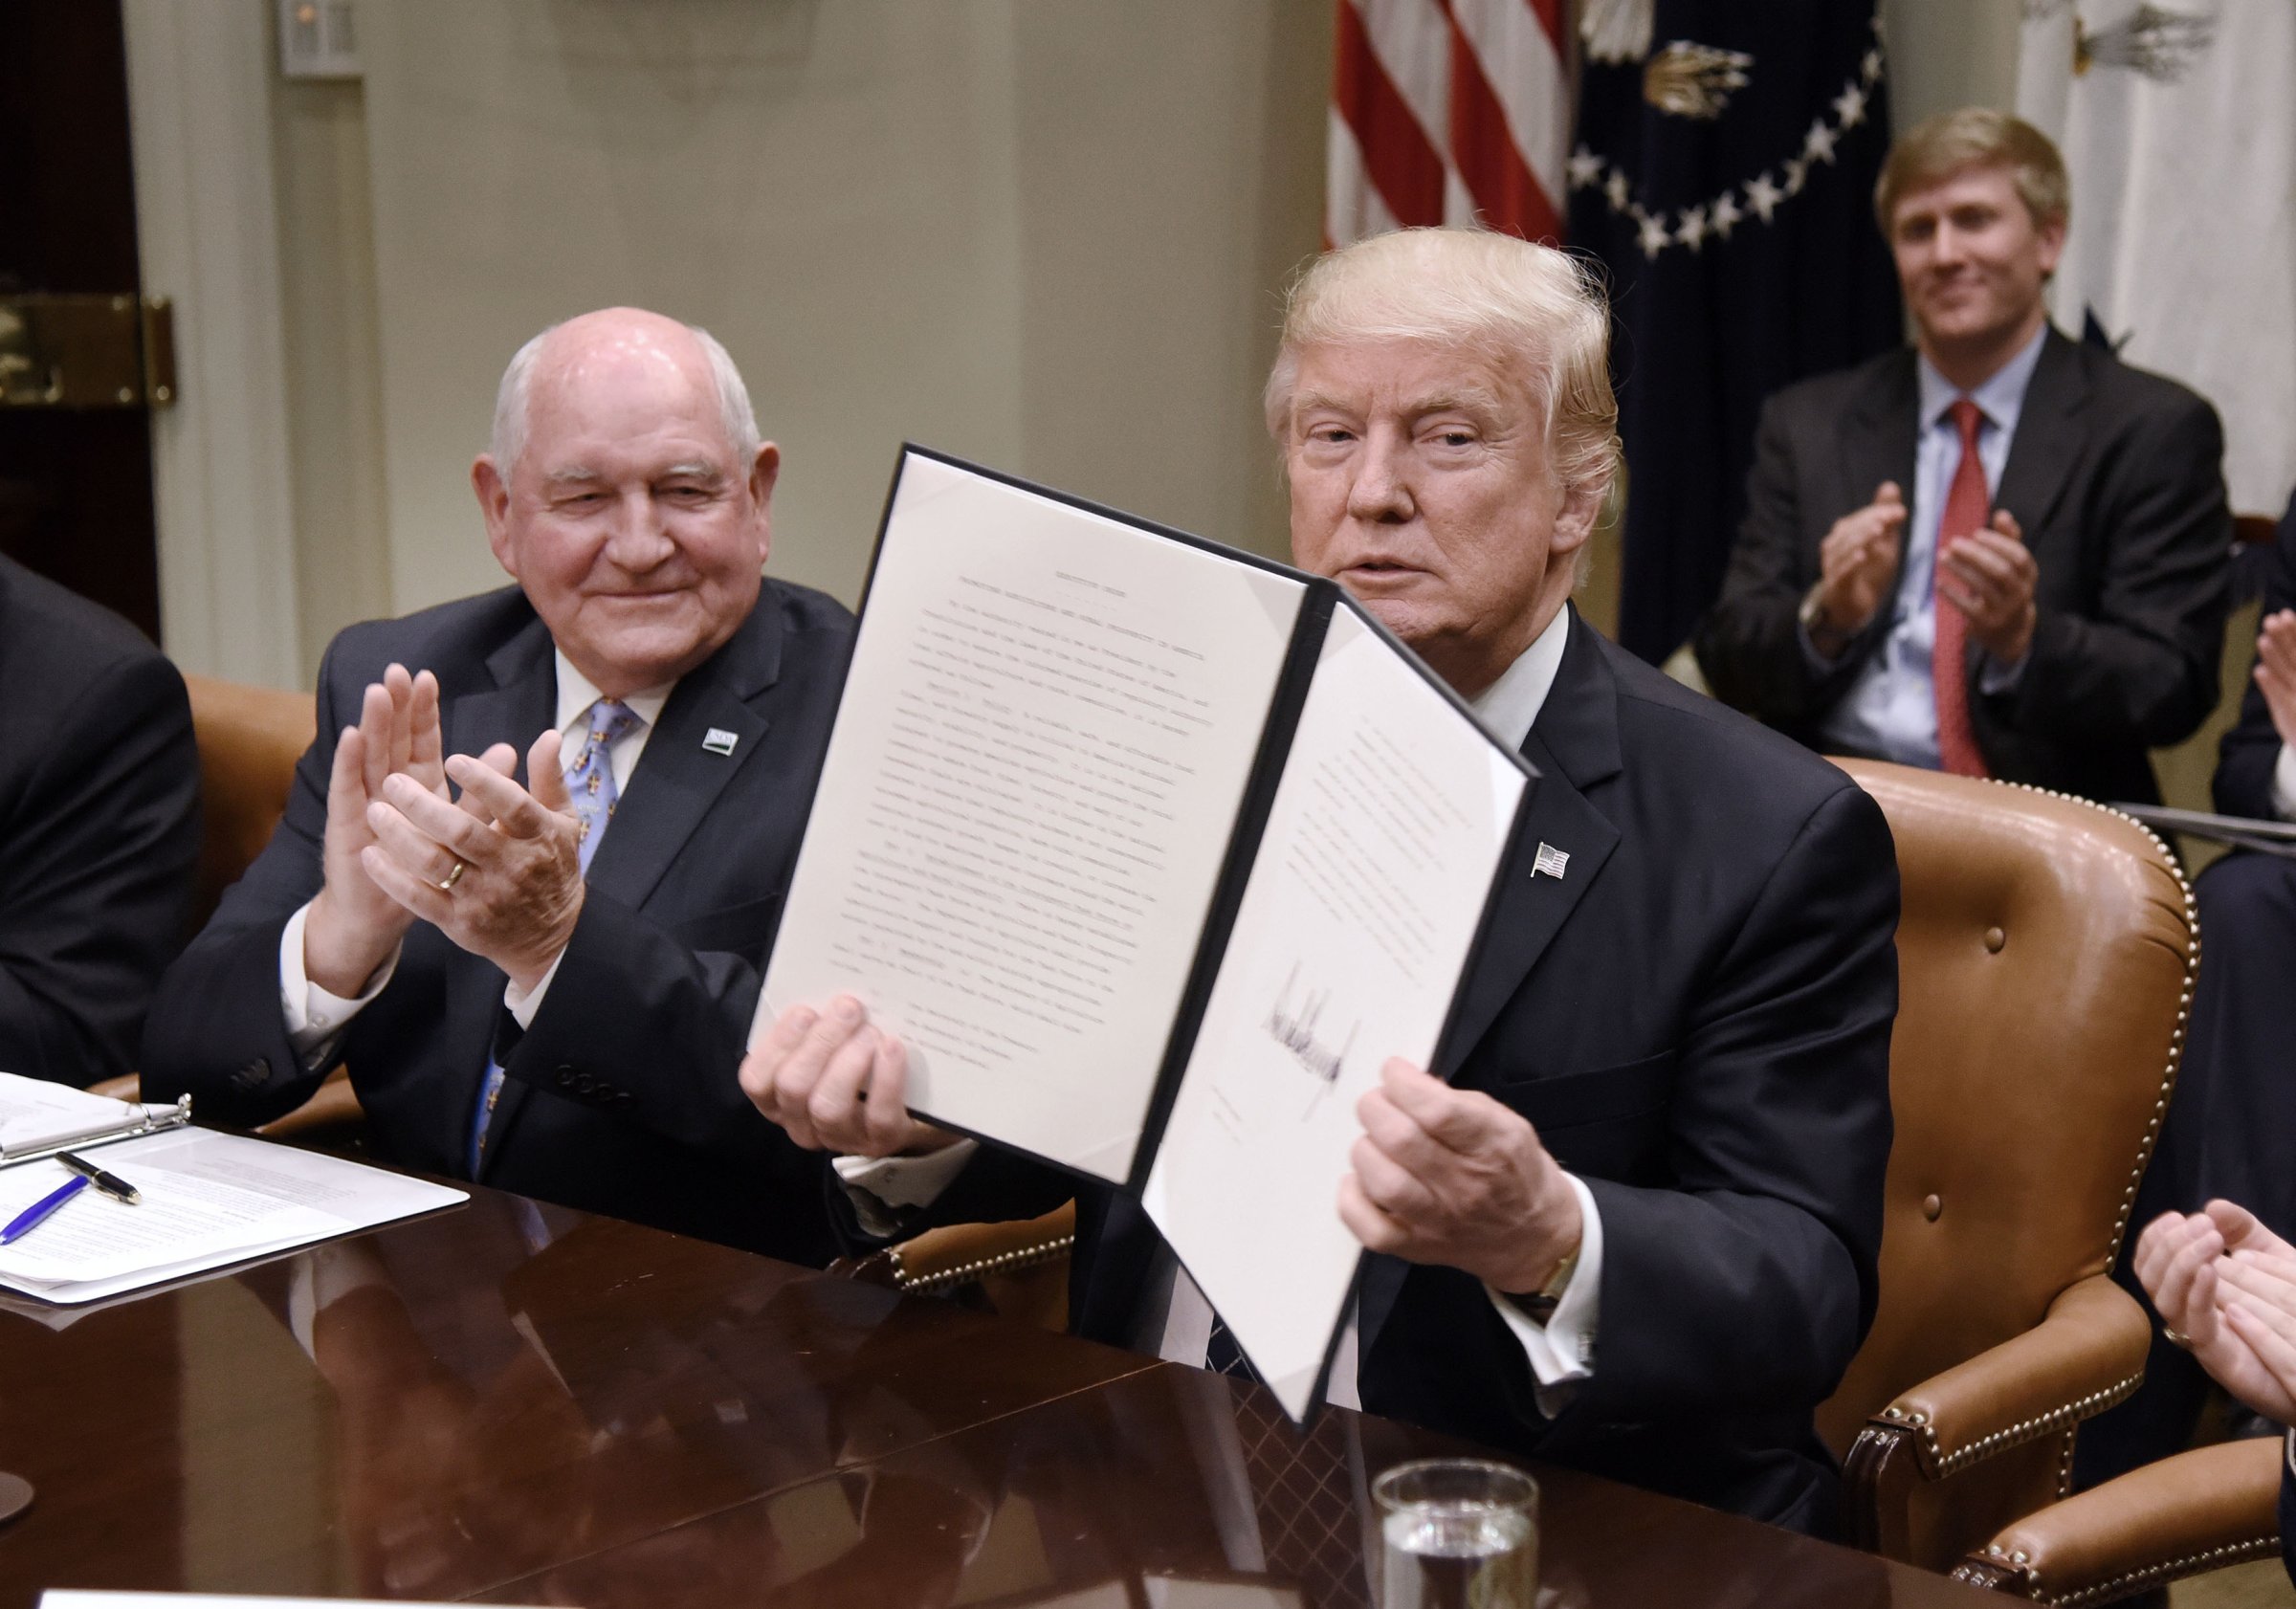 President Trump Signs Executive Order Promoting Agriculture And Rural Prosperity In America